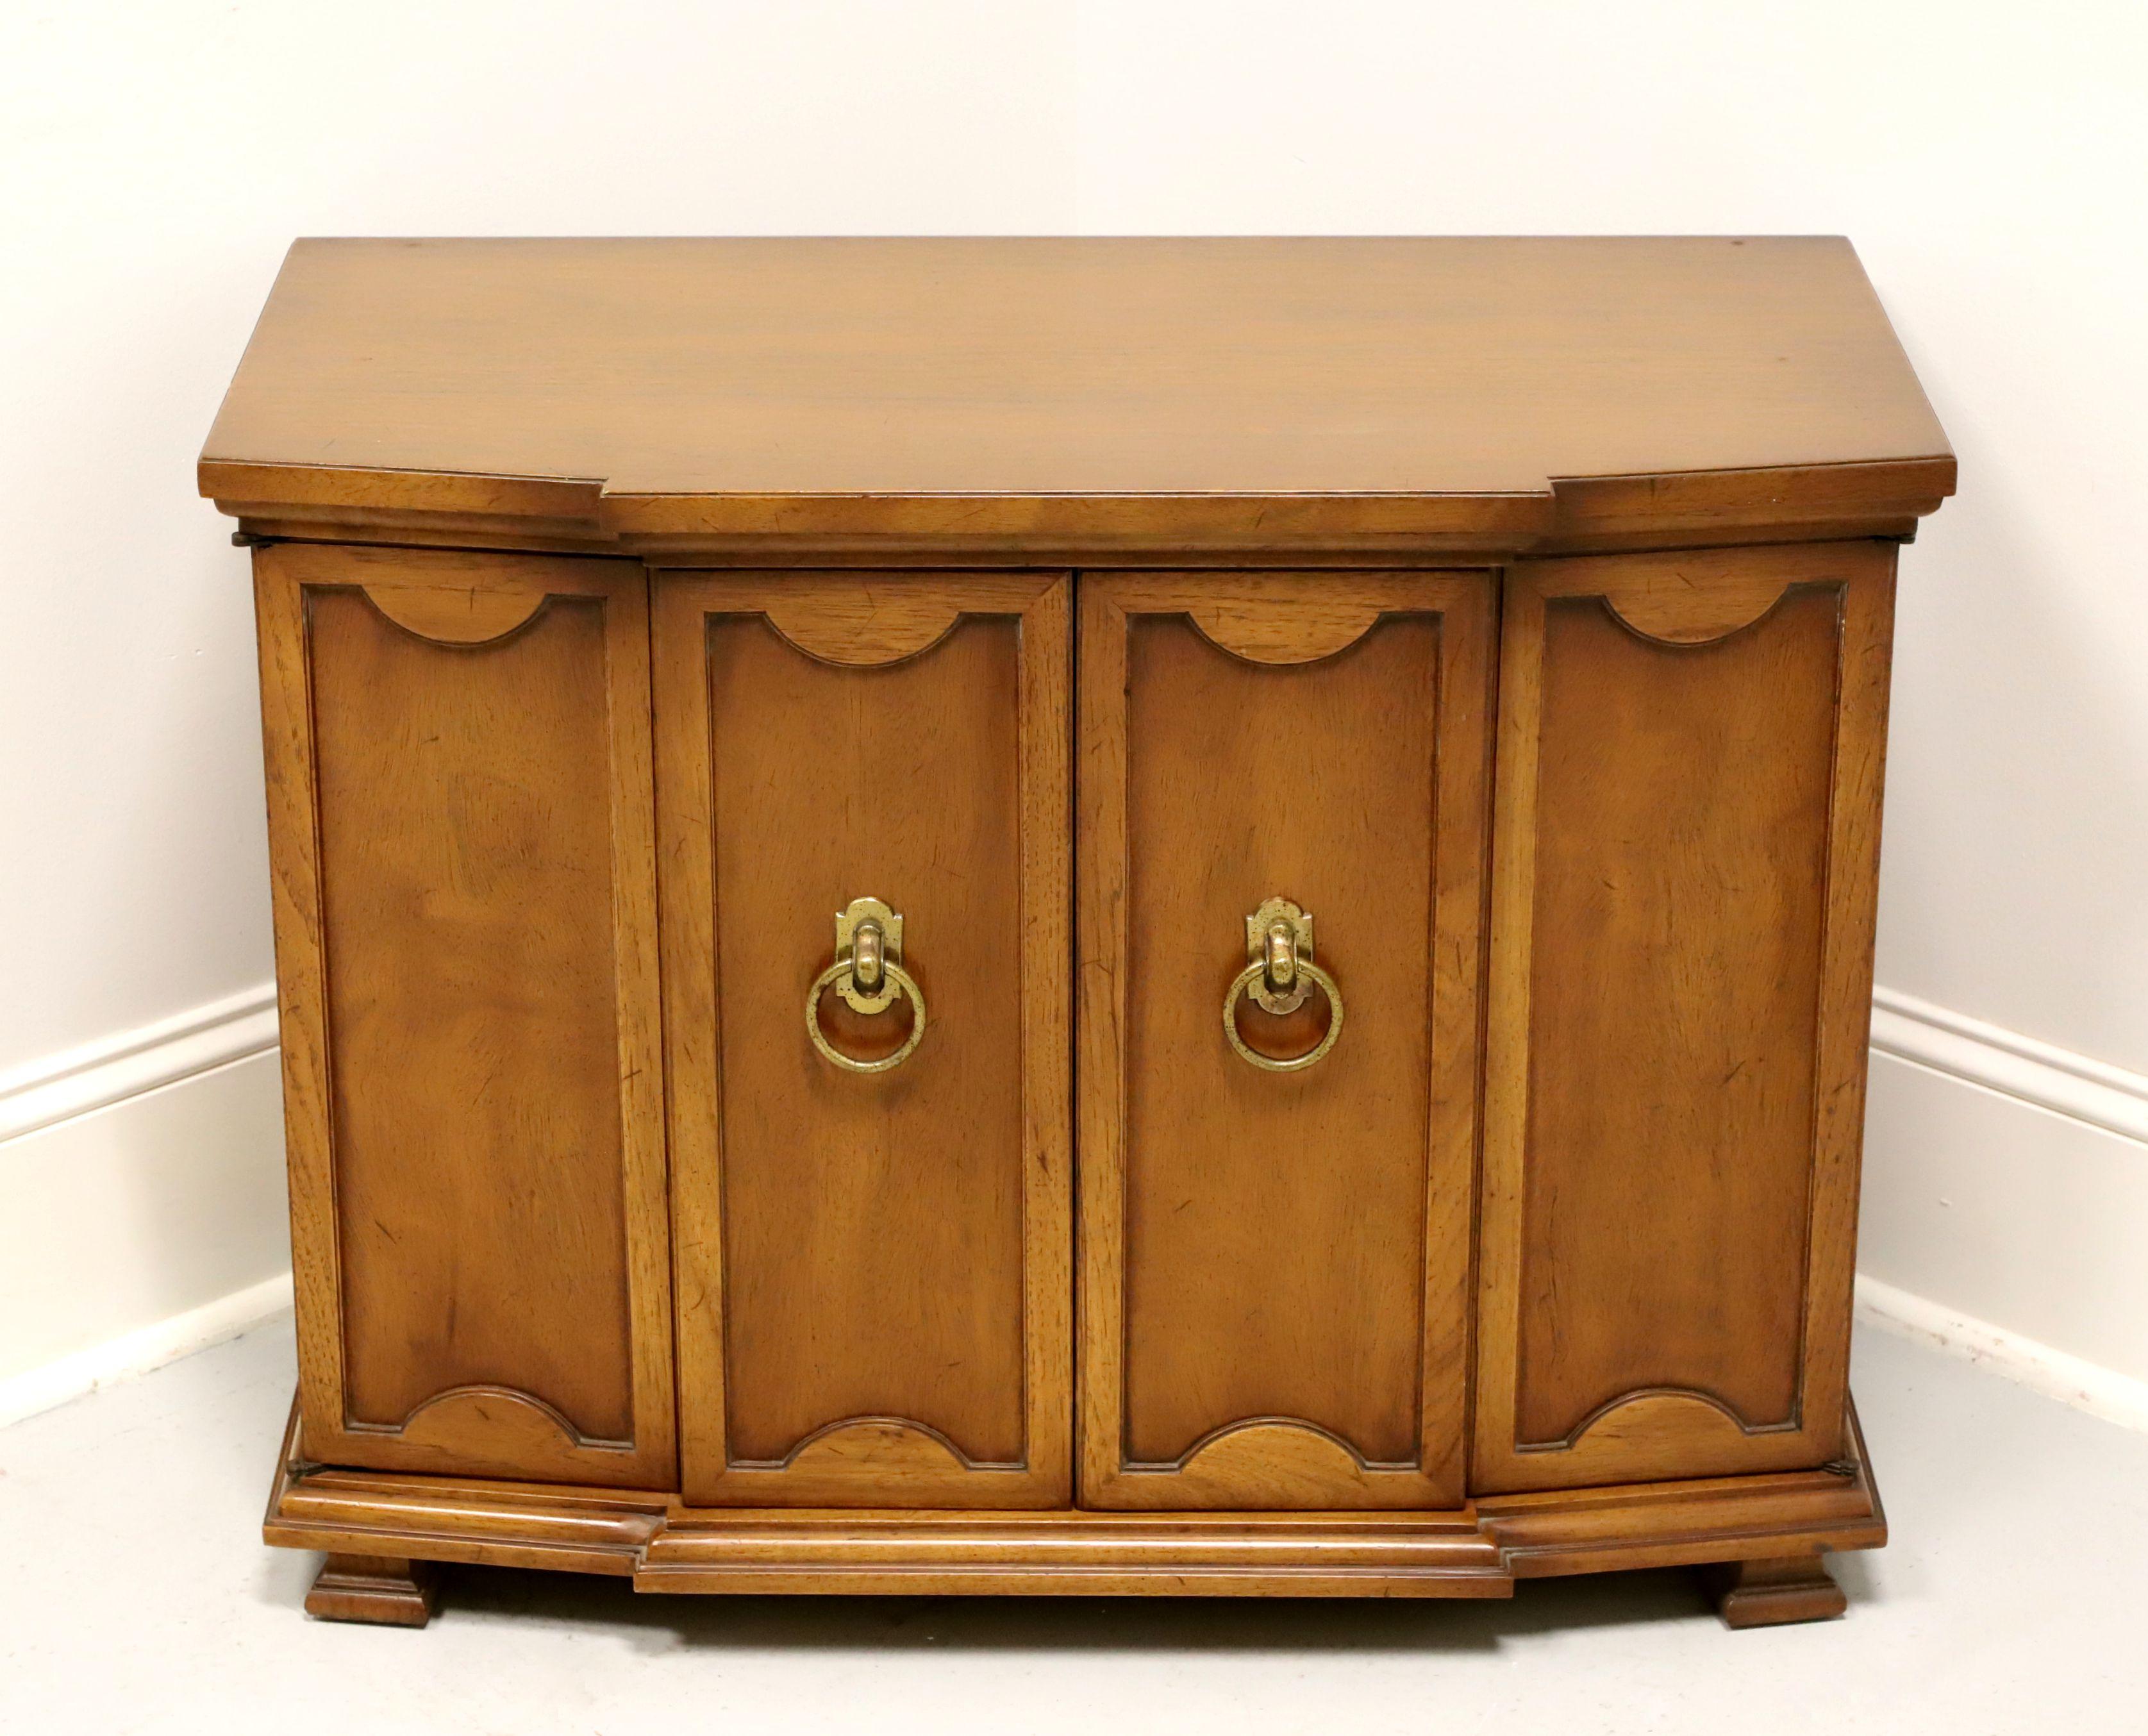 A Neoclassical style console cabinet by Tomlinson Furniture. Walnut with their Tokay finish, slight distressing and brass hardware. Features cabinet with two bi-fold doors revealing a storage area with one adjustable wood shelf. Made in North